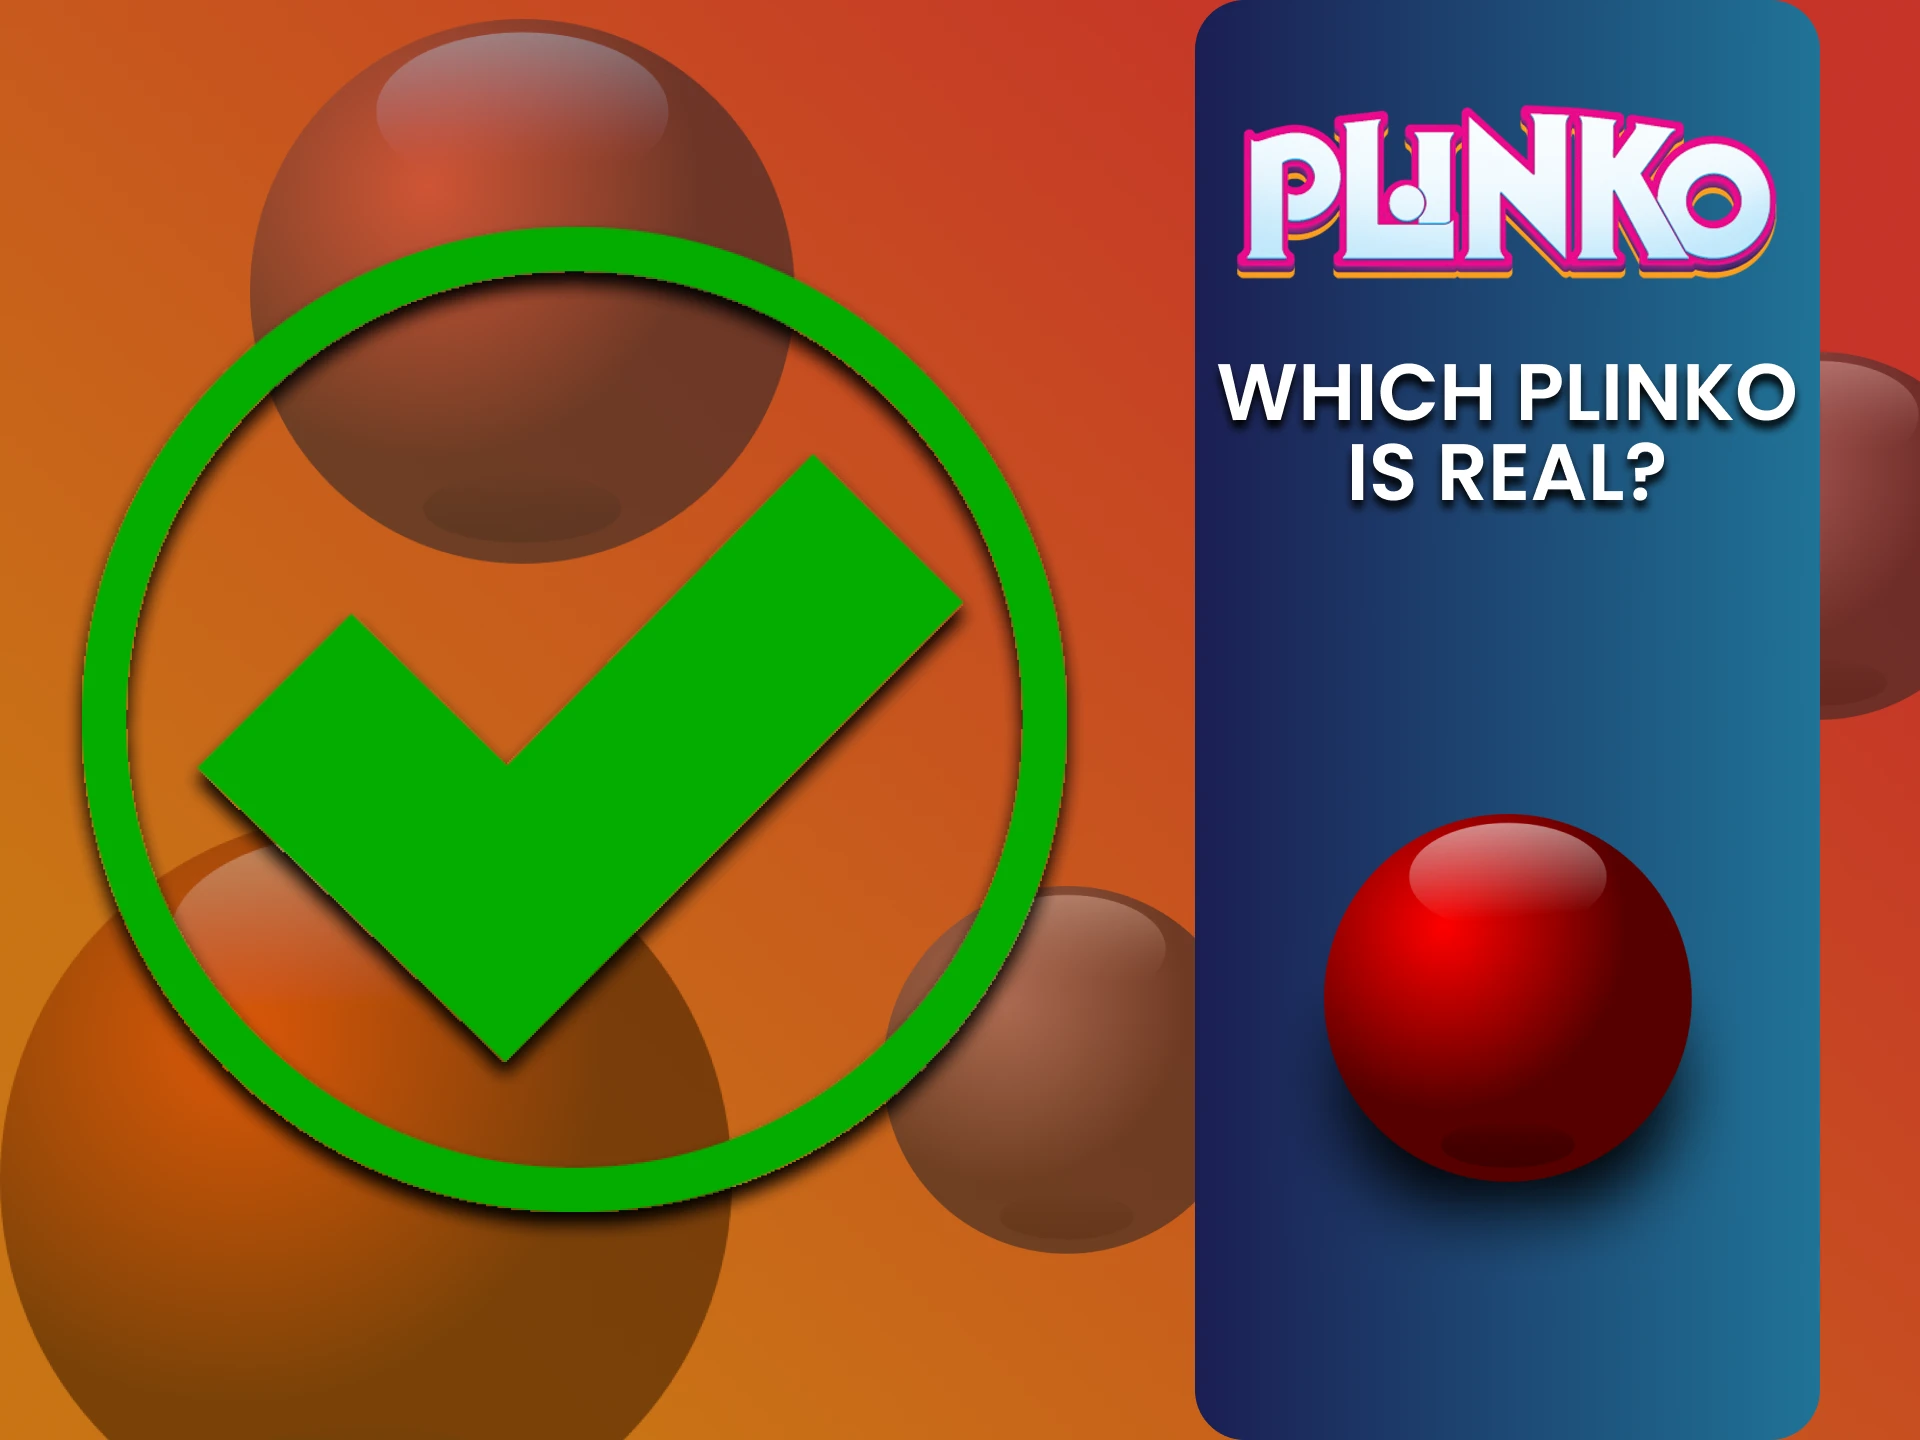 There are many Plinko games from different providers.